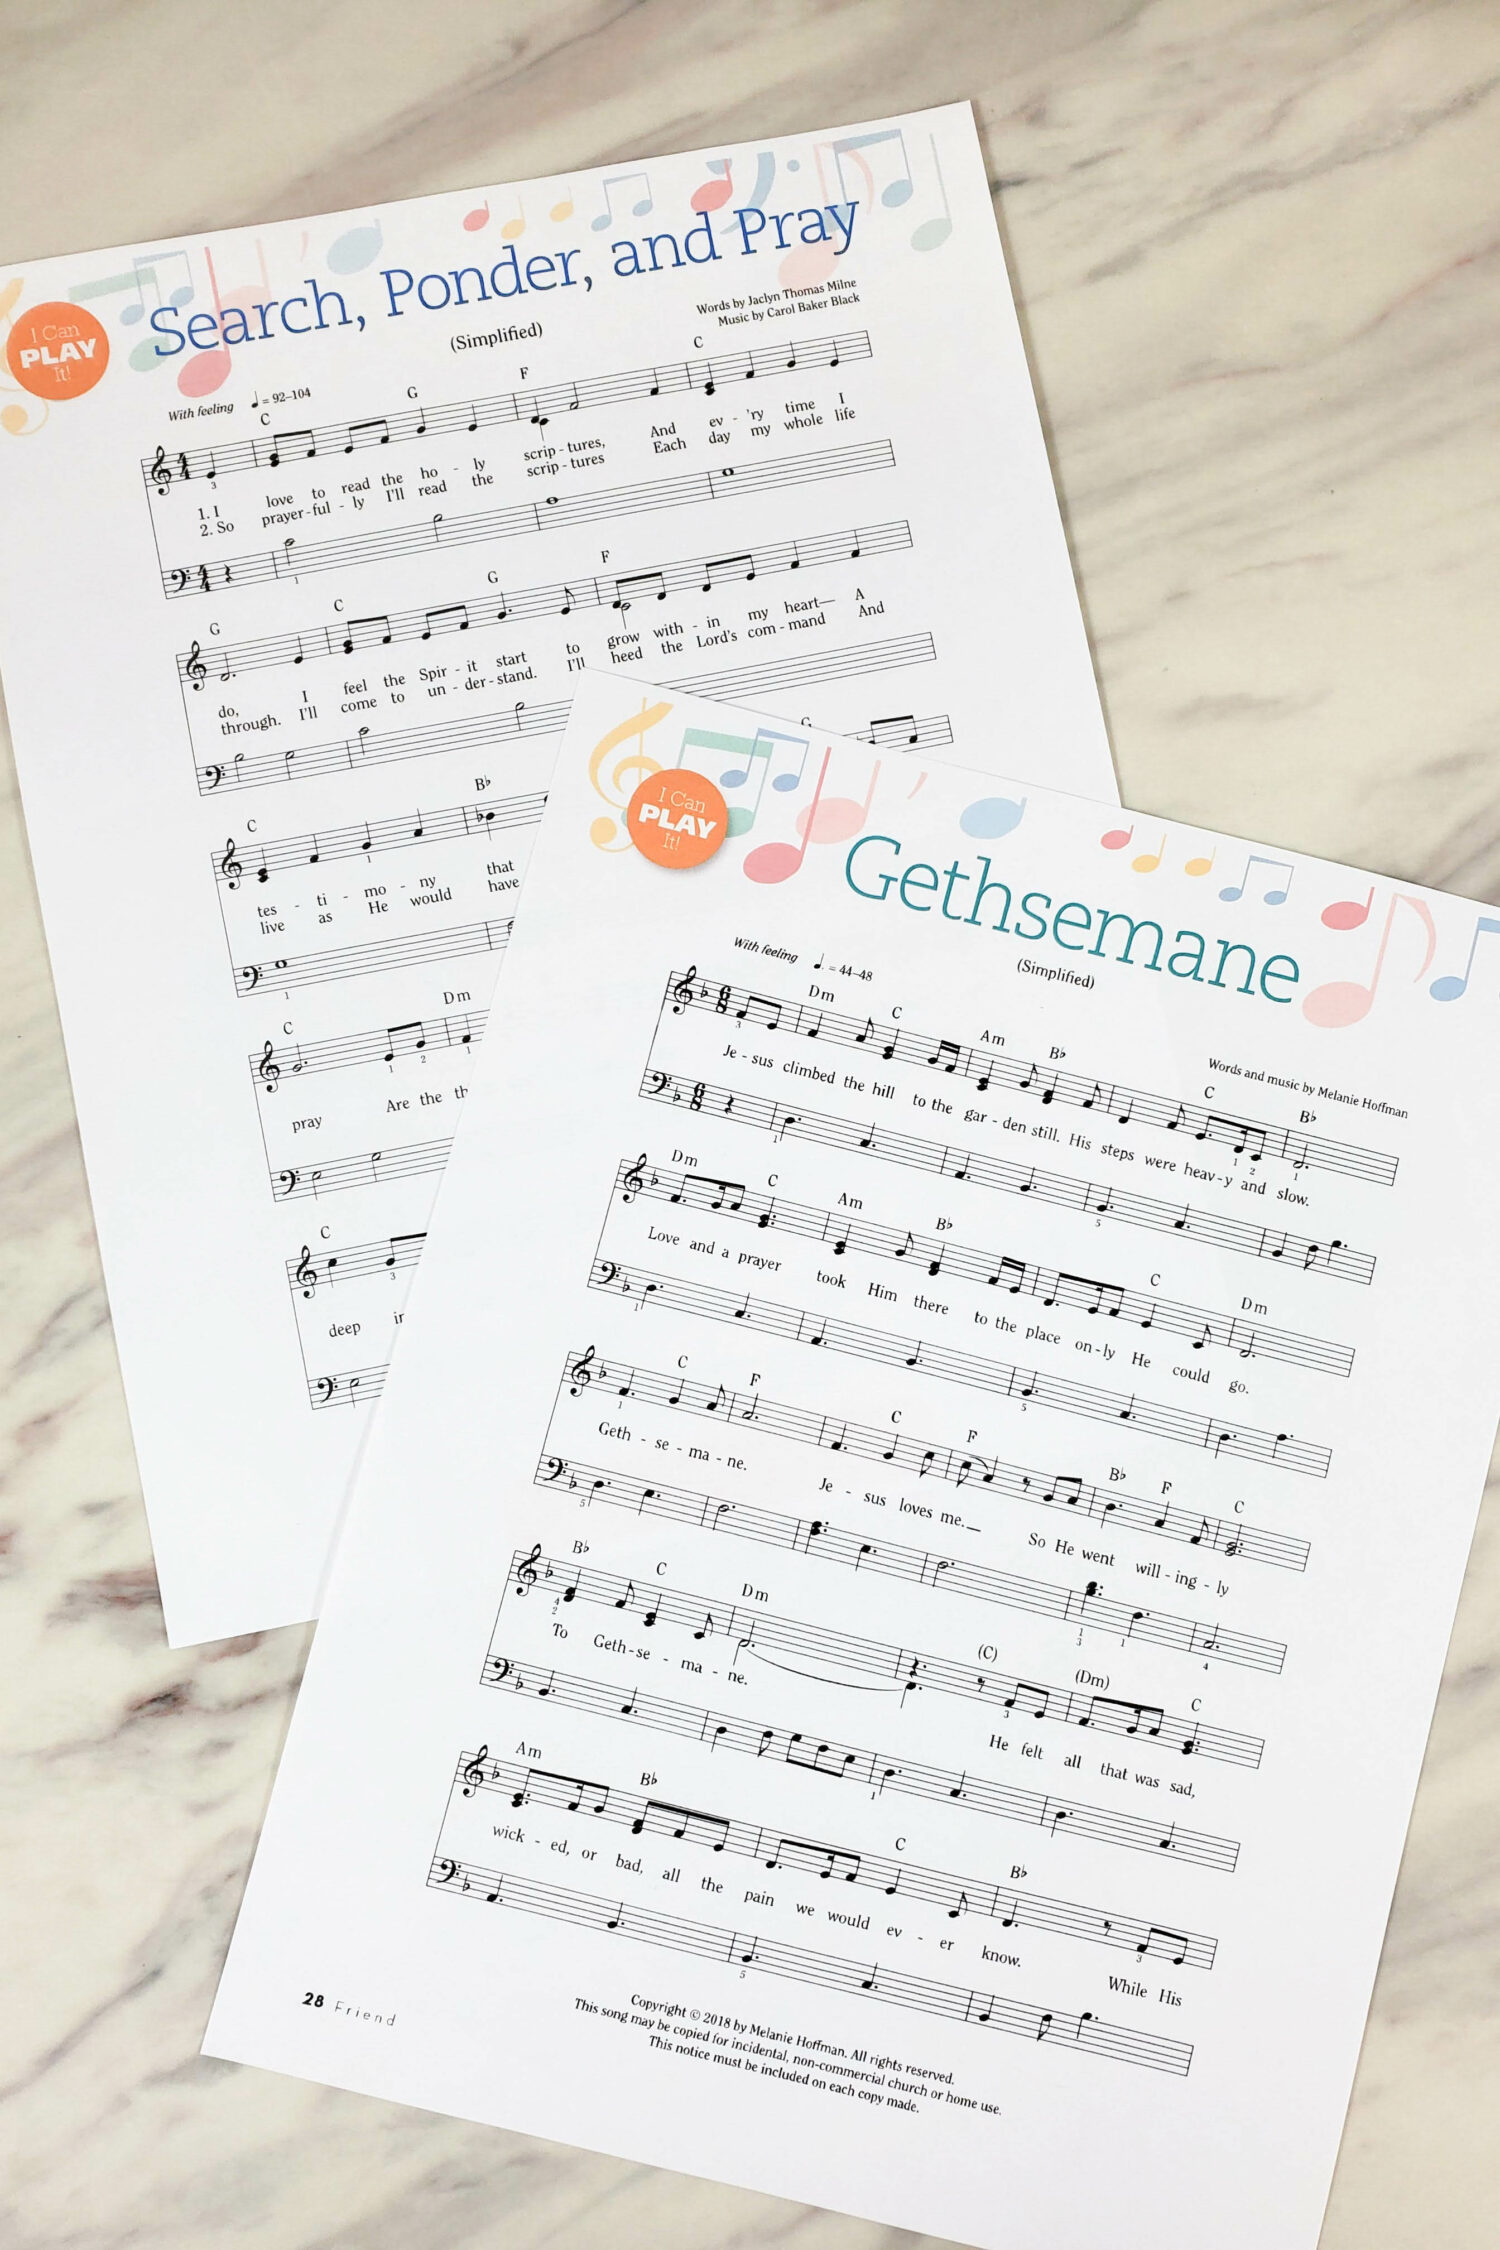 Utilize this master list of ALL the LDS Primary "I Can Play It" simplified sheet music! It includes a variety of songs from the Children's Songbook, a few from the hymn book, and even some songs from the Friend magazine. Great resource to help music leaders planning their singing time activities and even the Primary program.